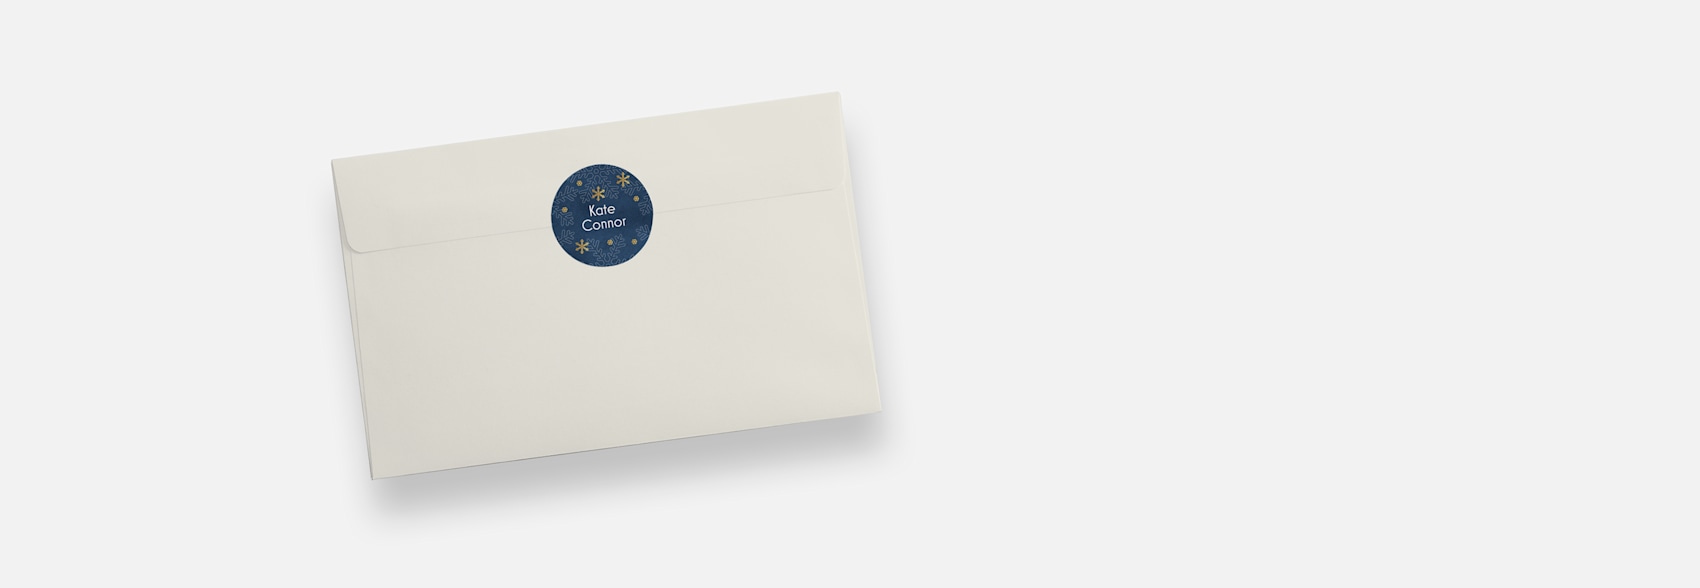 Gloss White Invitation seals Personalised Oval envelope Stickers customised 50 